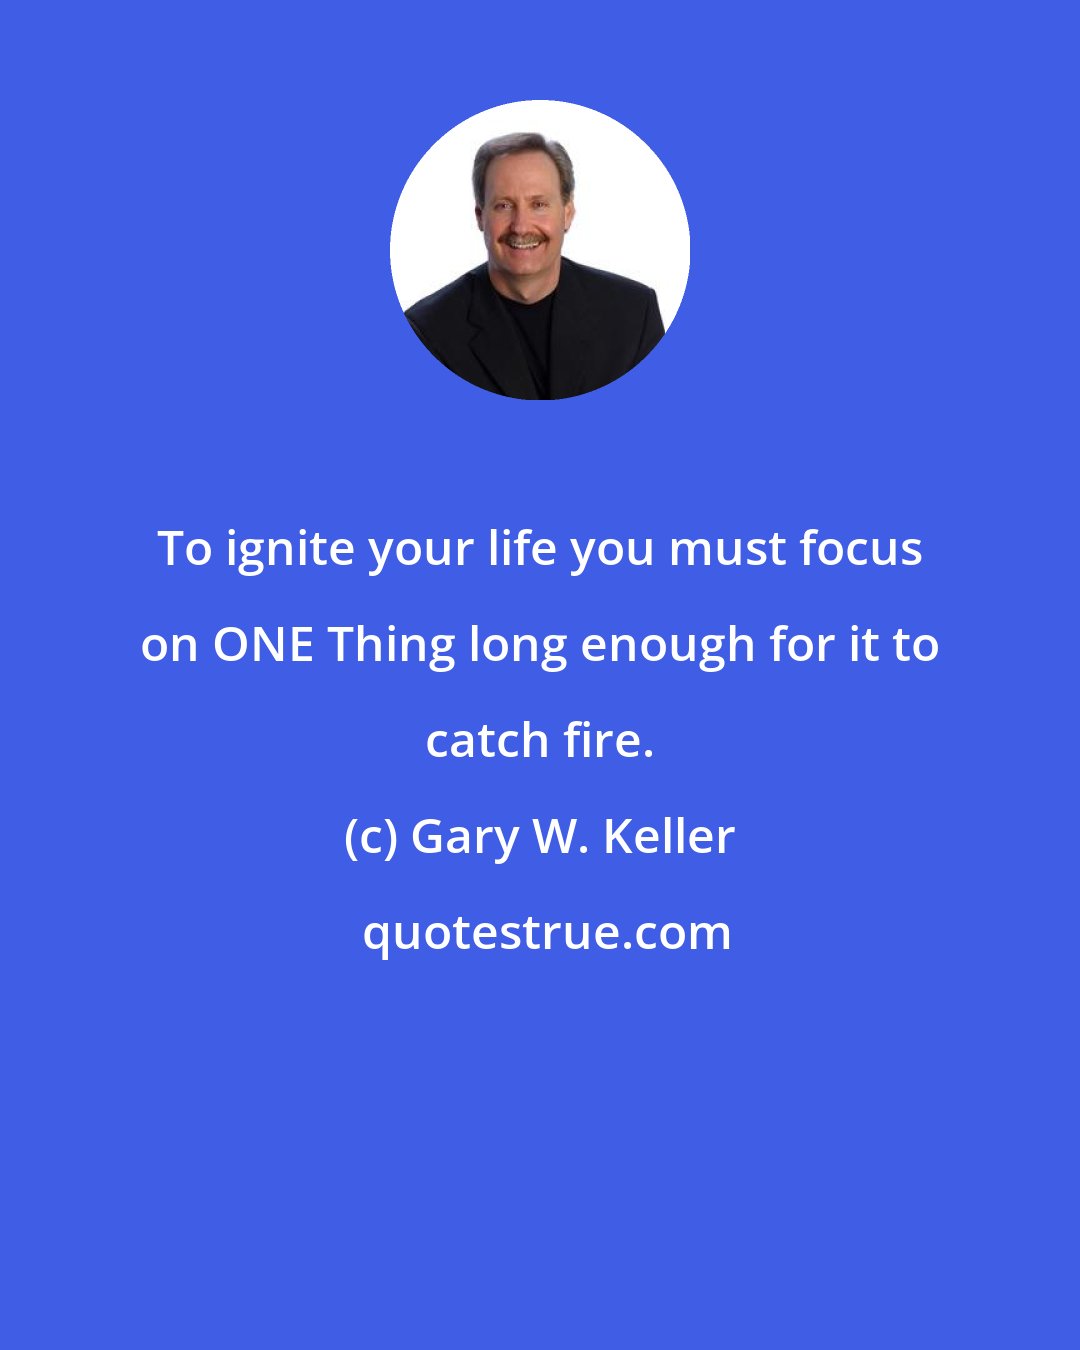 Gary W. Keller: To ignite your life you must focus on ONE Thing long enough for it to catch fire.